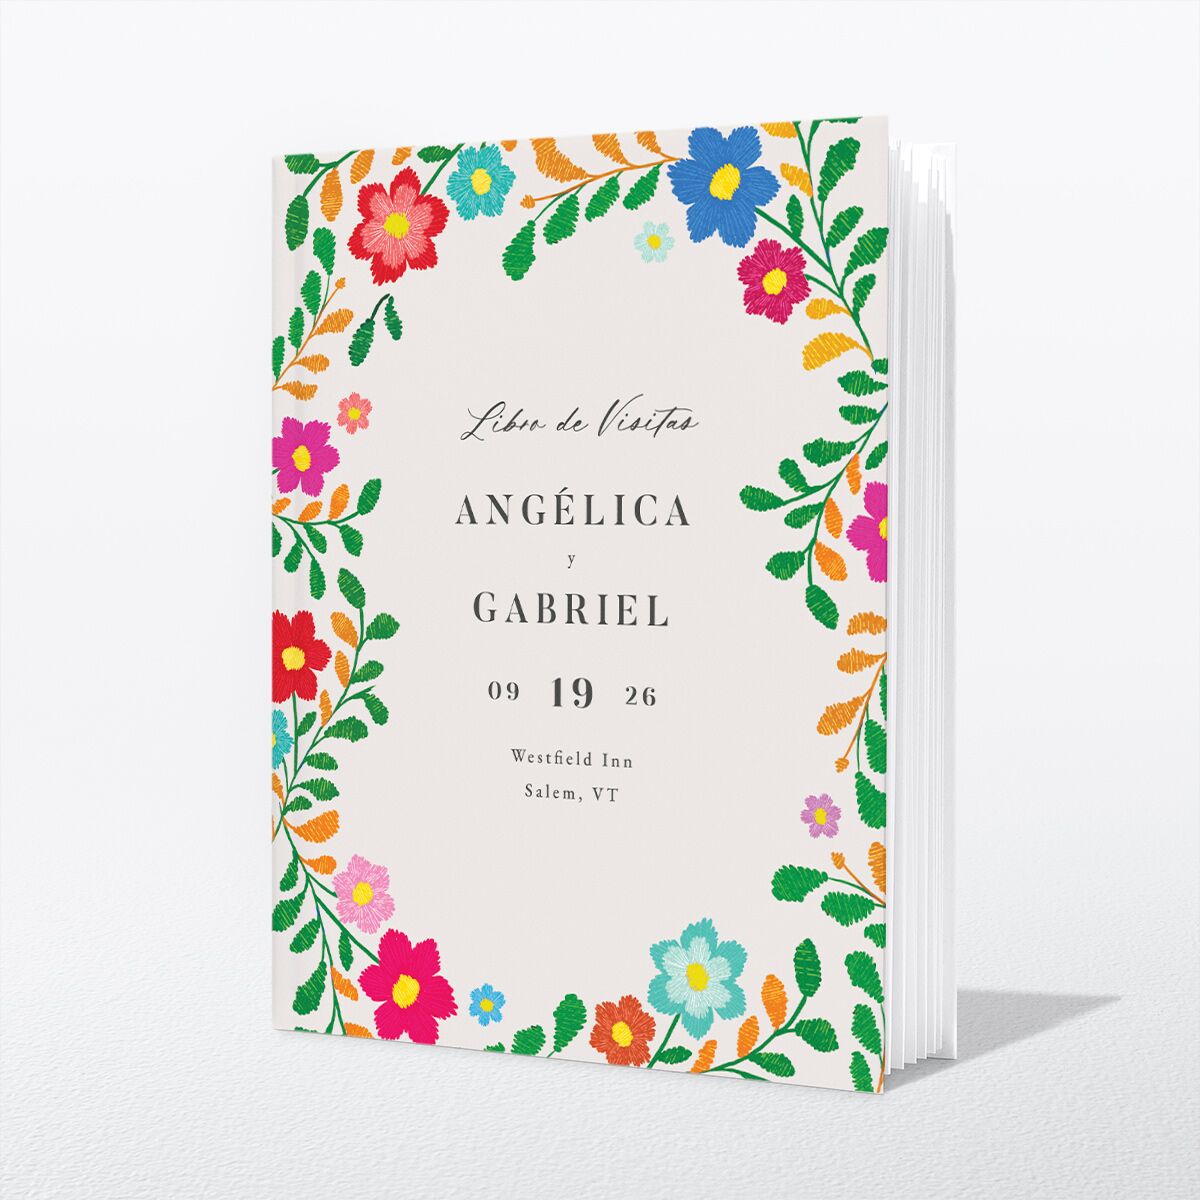 Bordados Florales Wedding Guest Book front in white